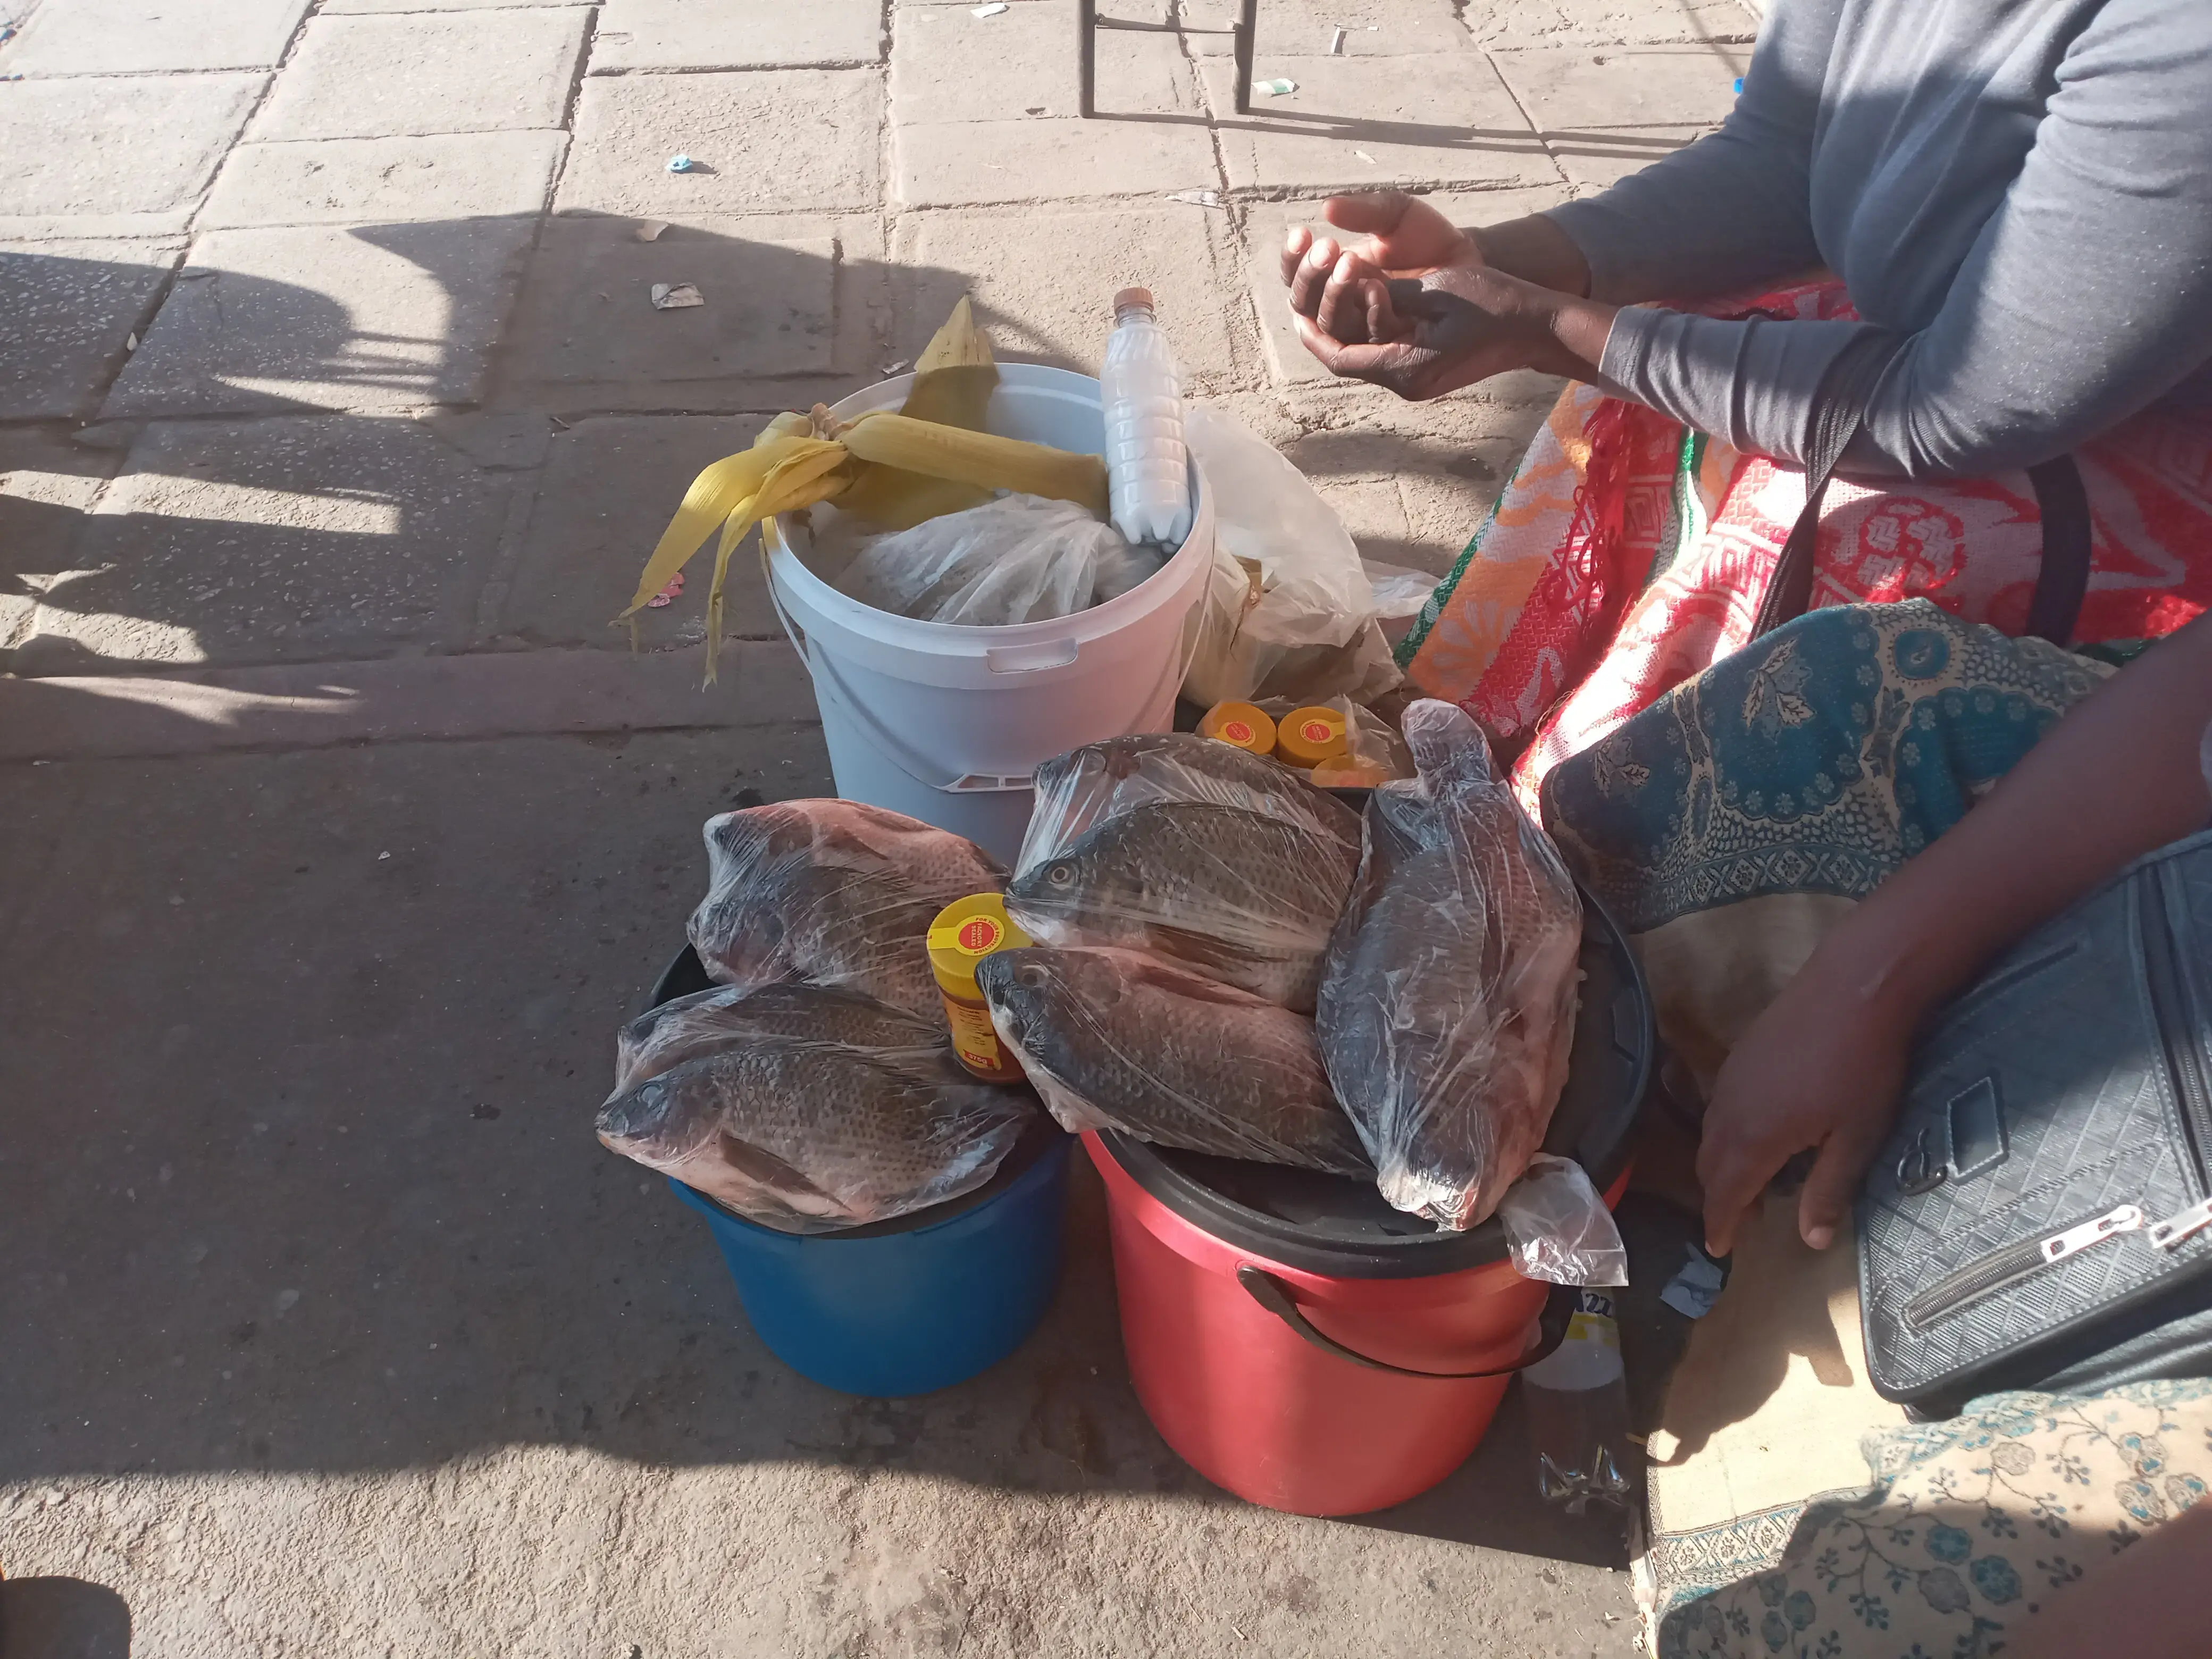 women's hands and buckets of fish